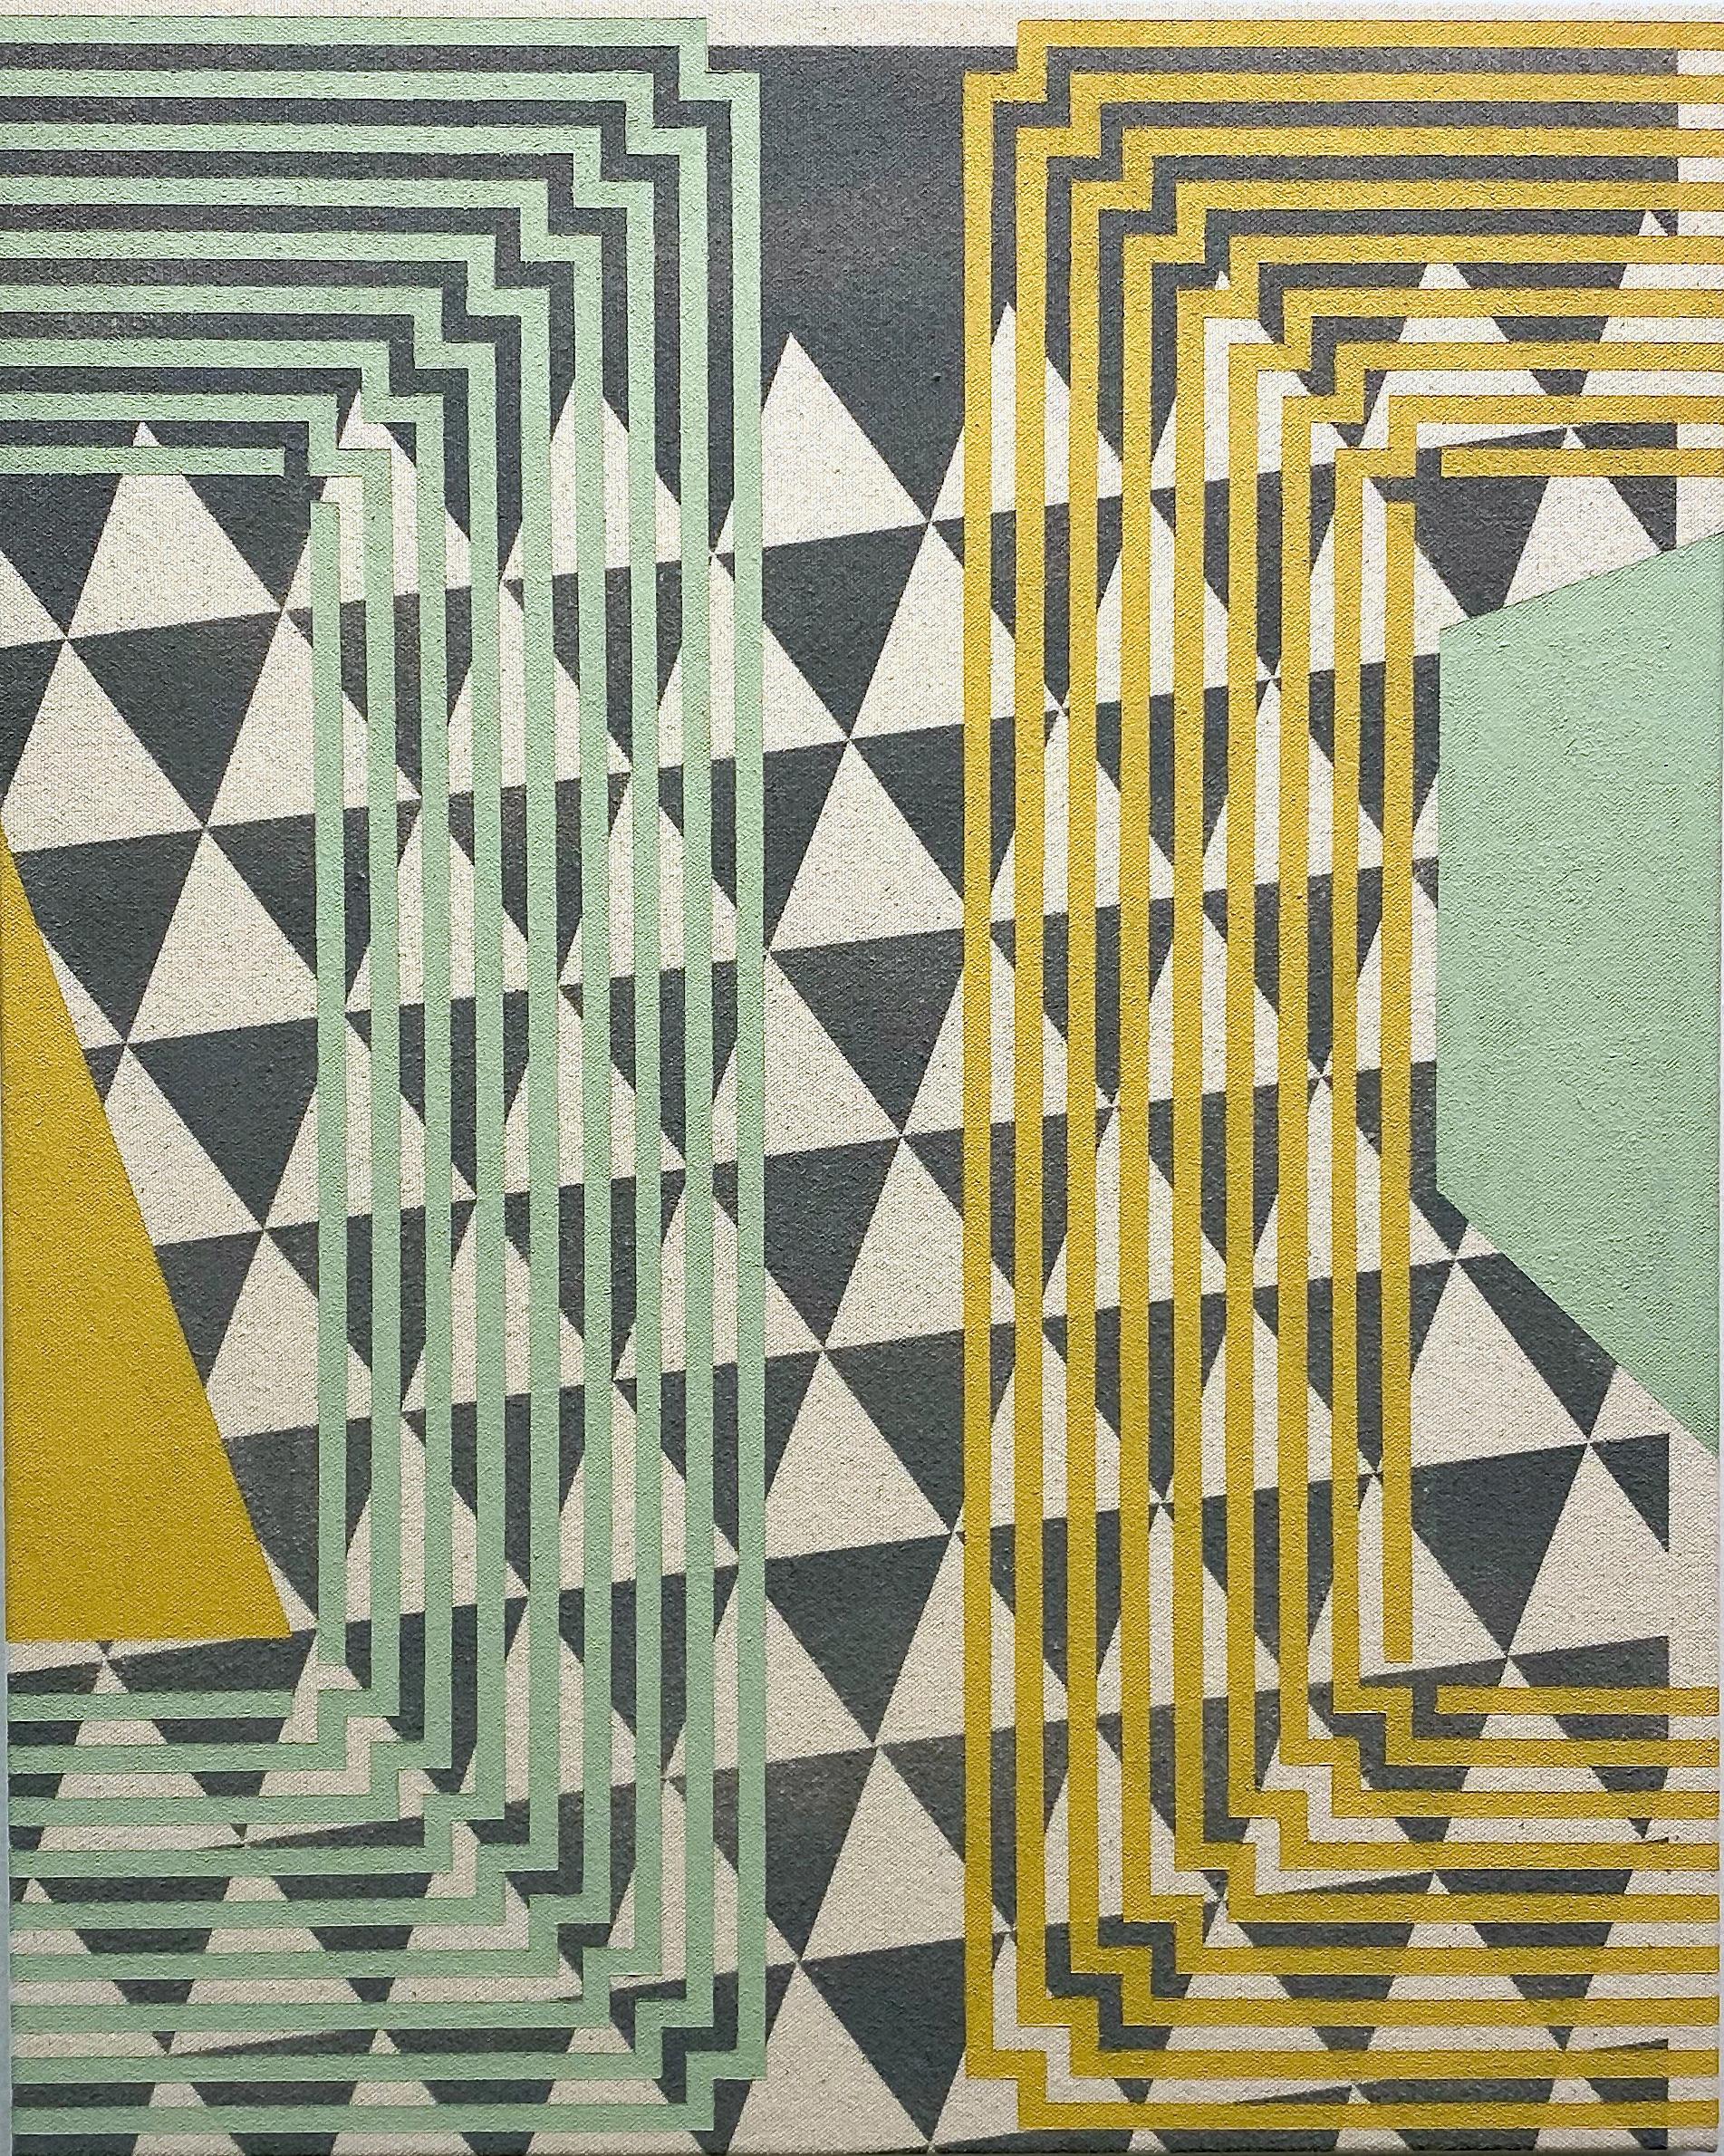 DIFFERENCE BETWEEN - Abstract Geometric, Mint Green, Yellow, Grey on Canvas 